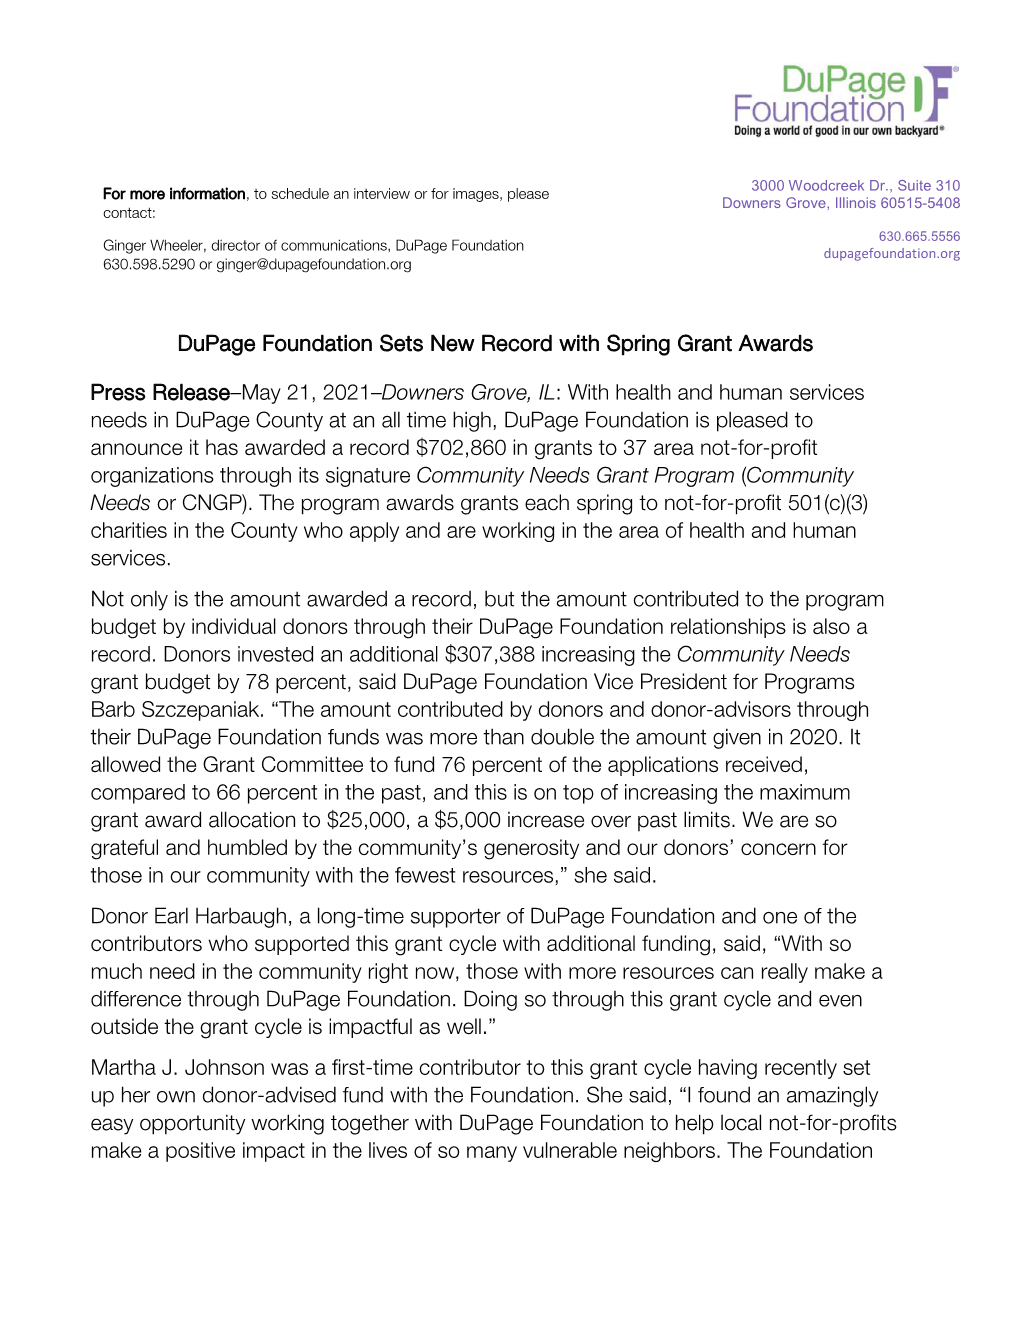 Dupage Foundation Sets New Record with Spring Grant Awards Press